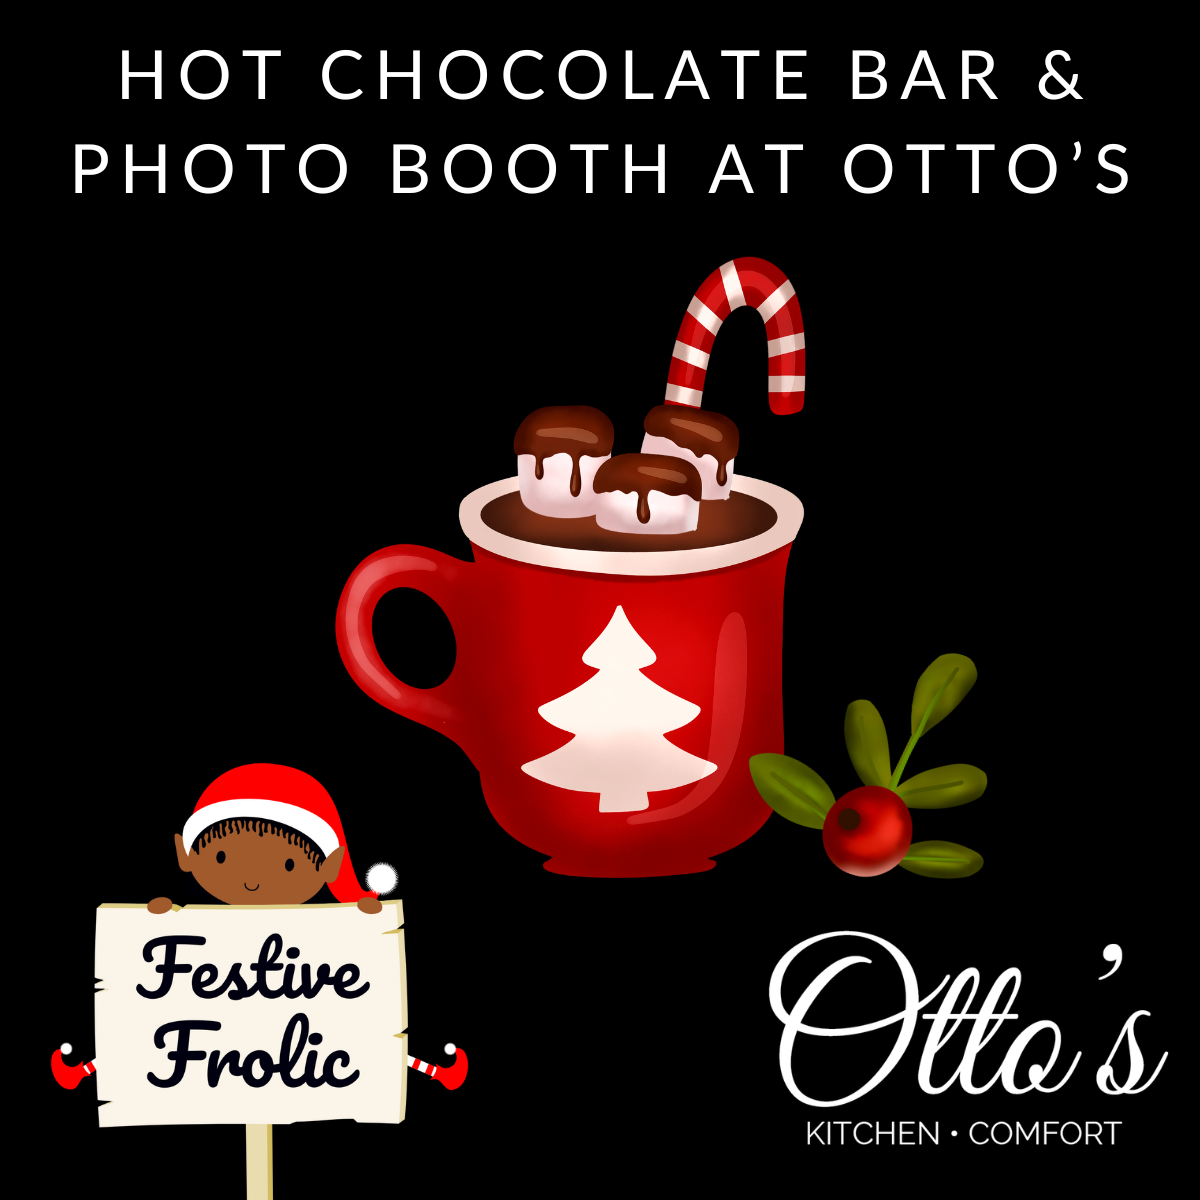 Hot Chocolate Bar & Photo Booth at Otto’s